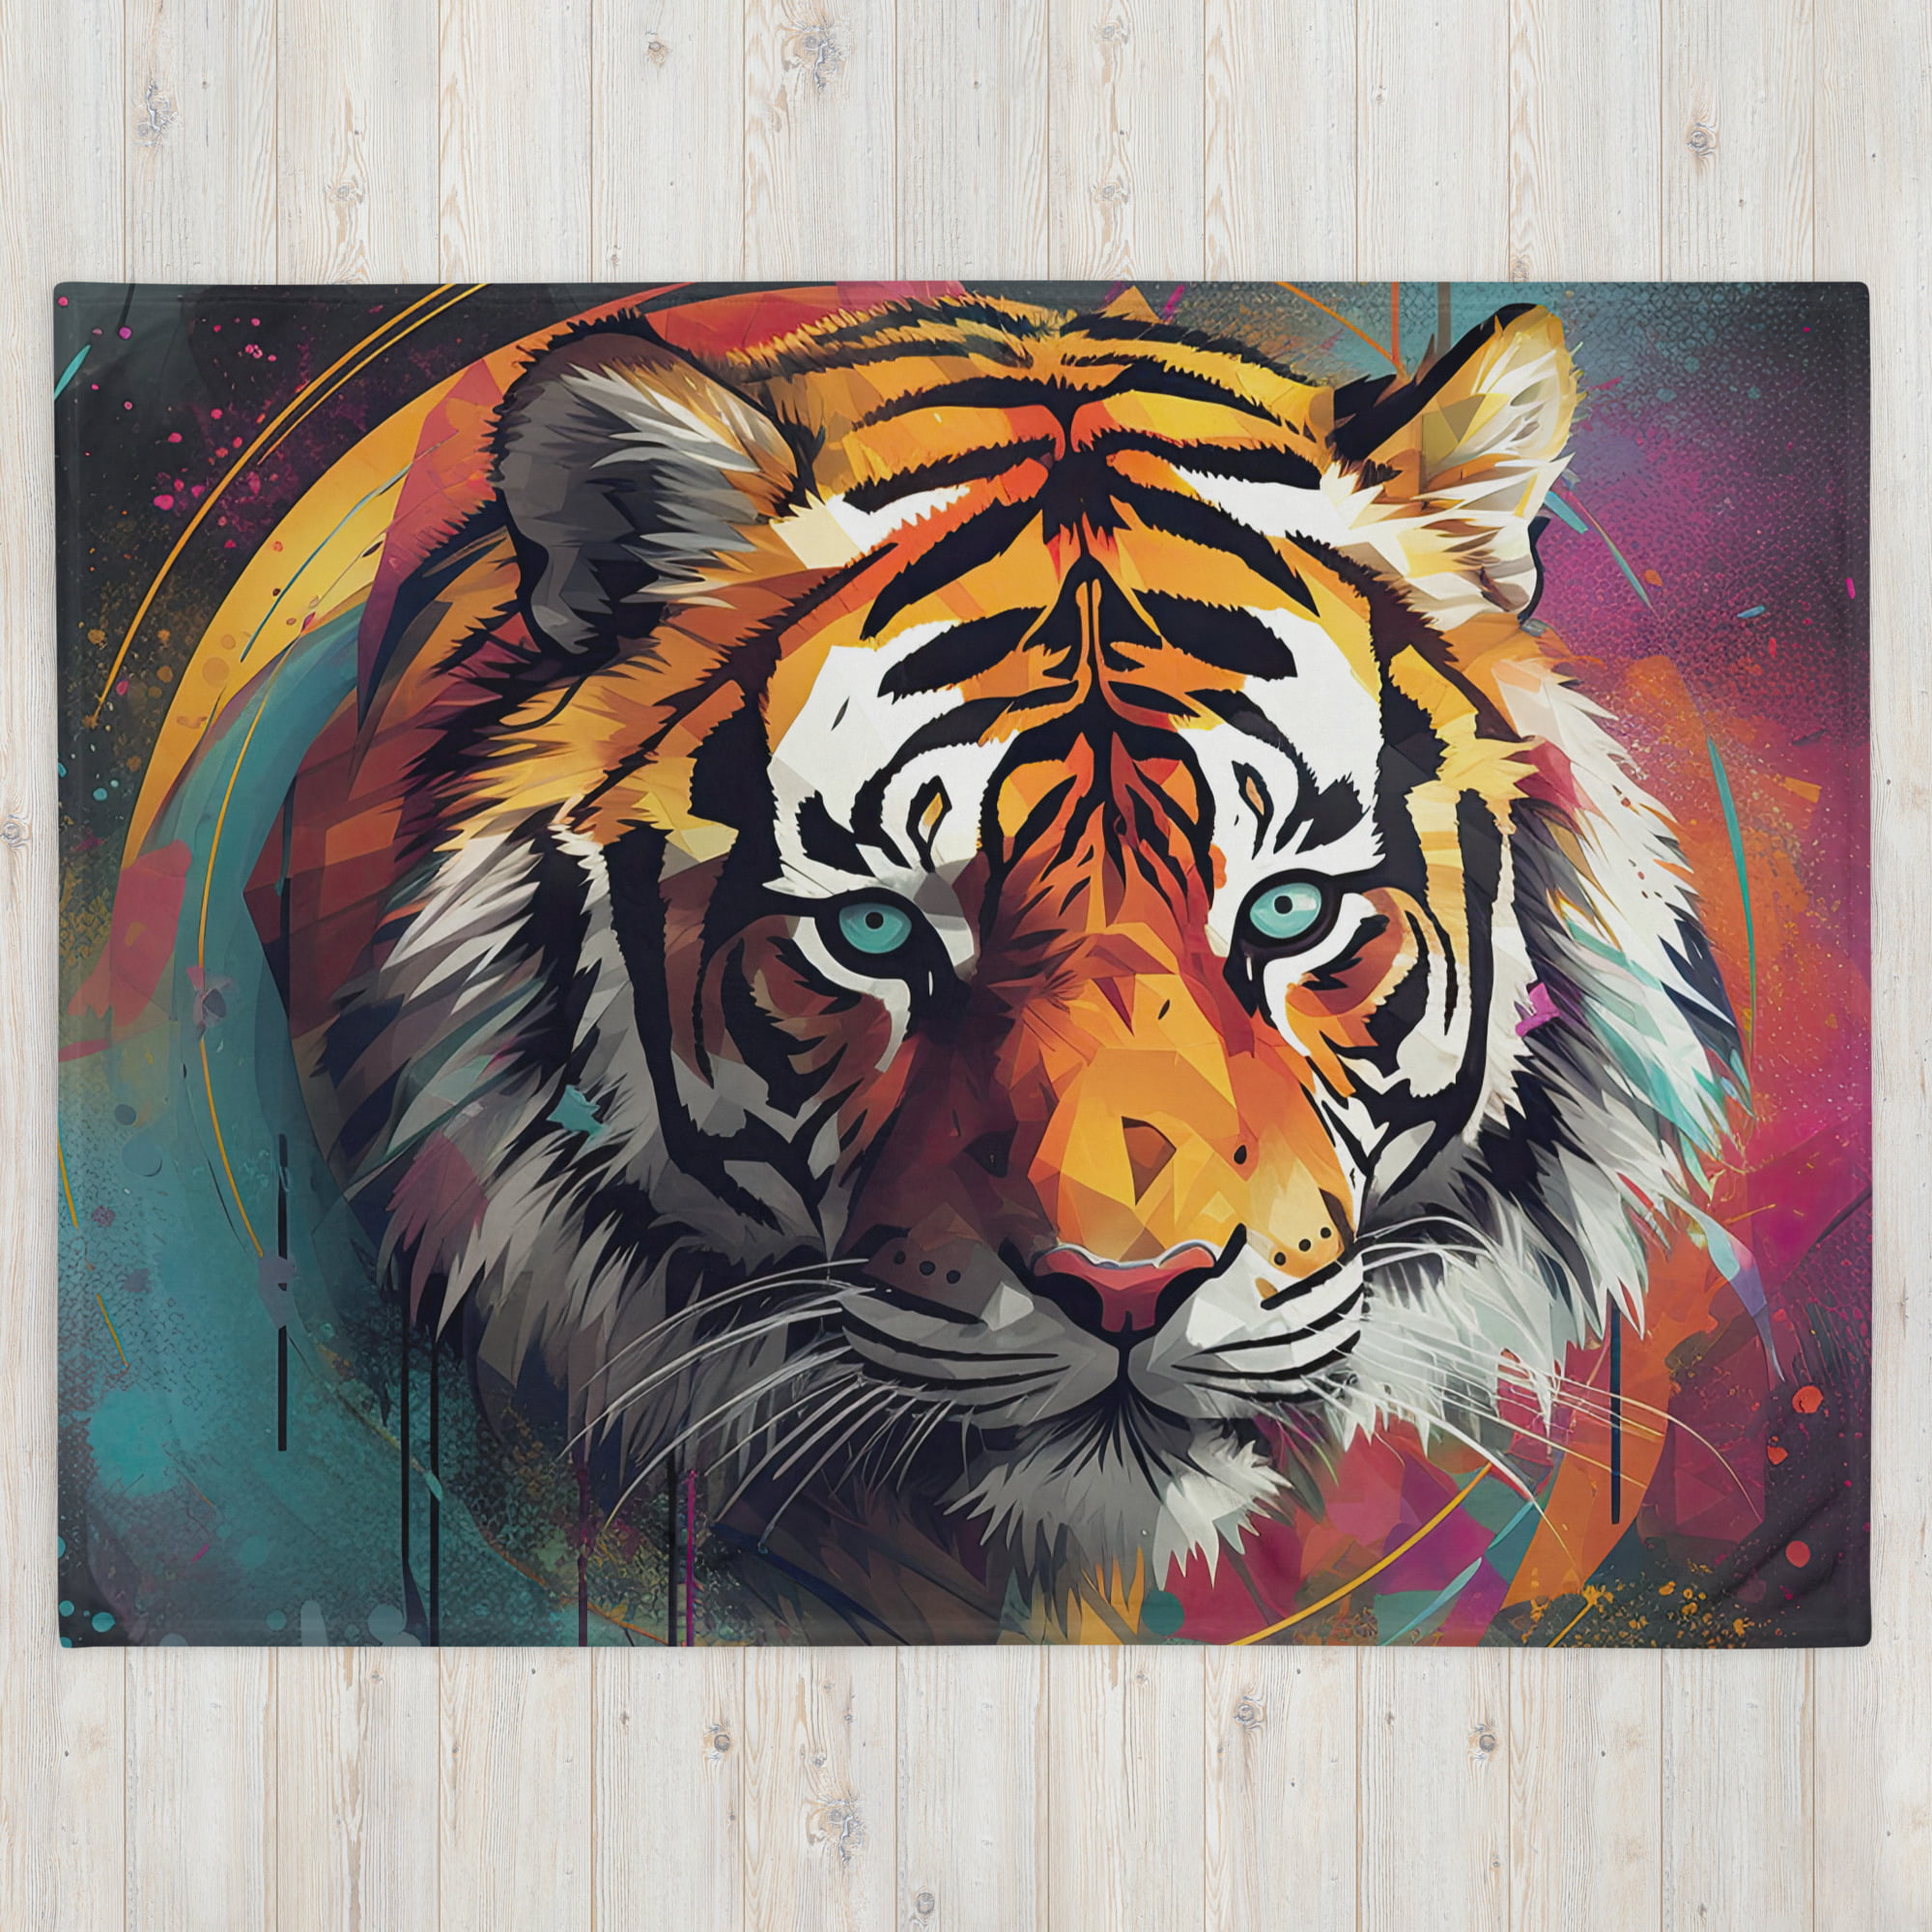 Abstract Tiger Art Throw Blanket – 60×80